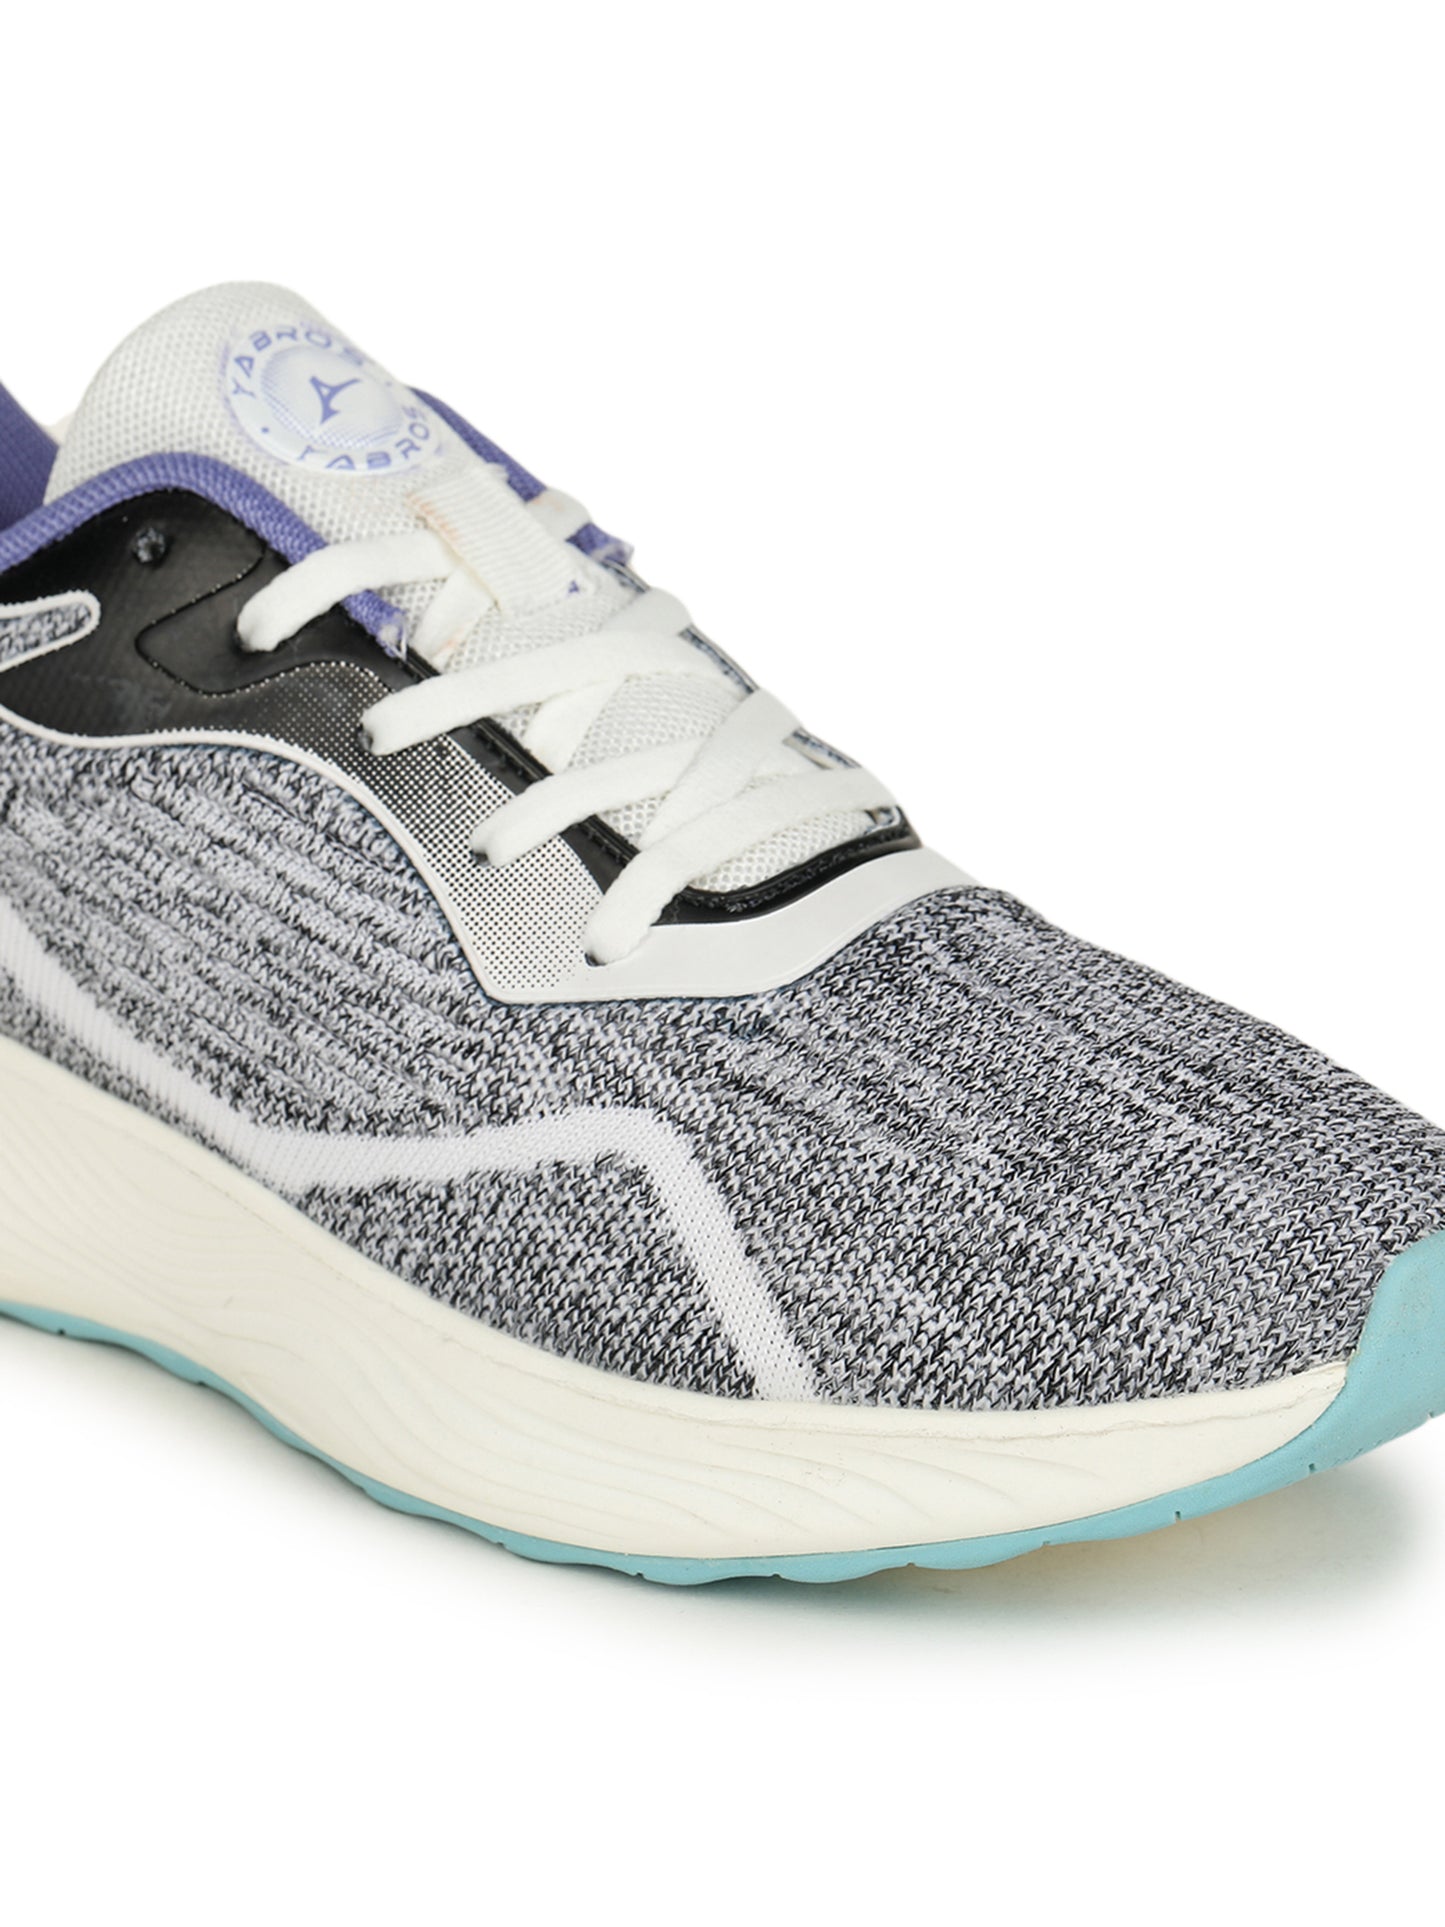 ABROS CORAL SPORTS SHOES FOR WOMEN